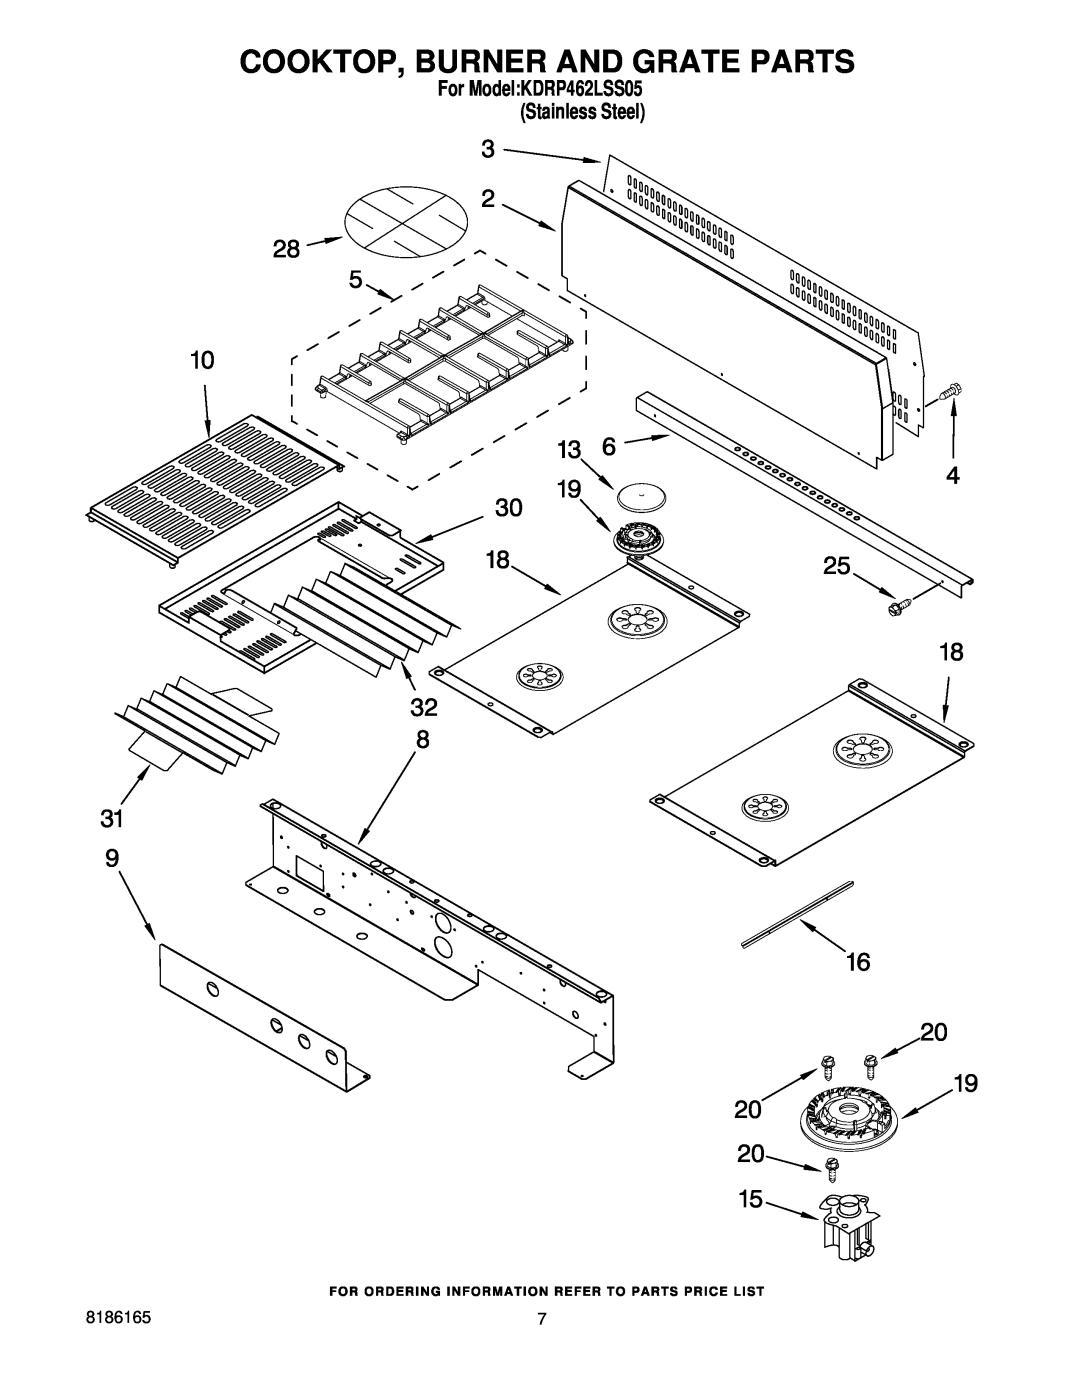 KitchenAid manual Cooktop, Burner And Grate Parts, For ModelKDRP462LSS05 Stainless Steel 